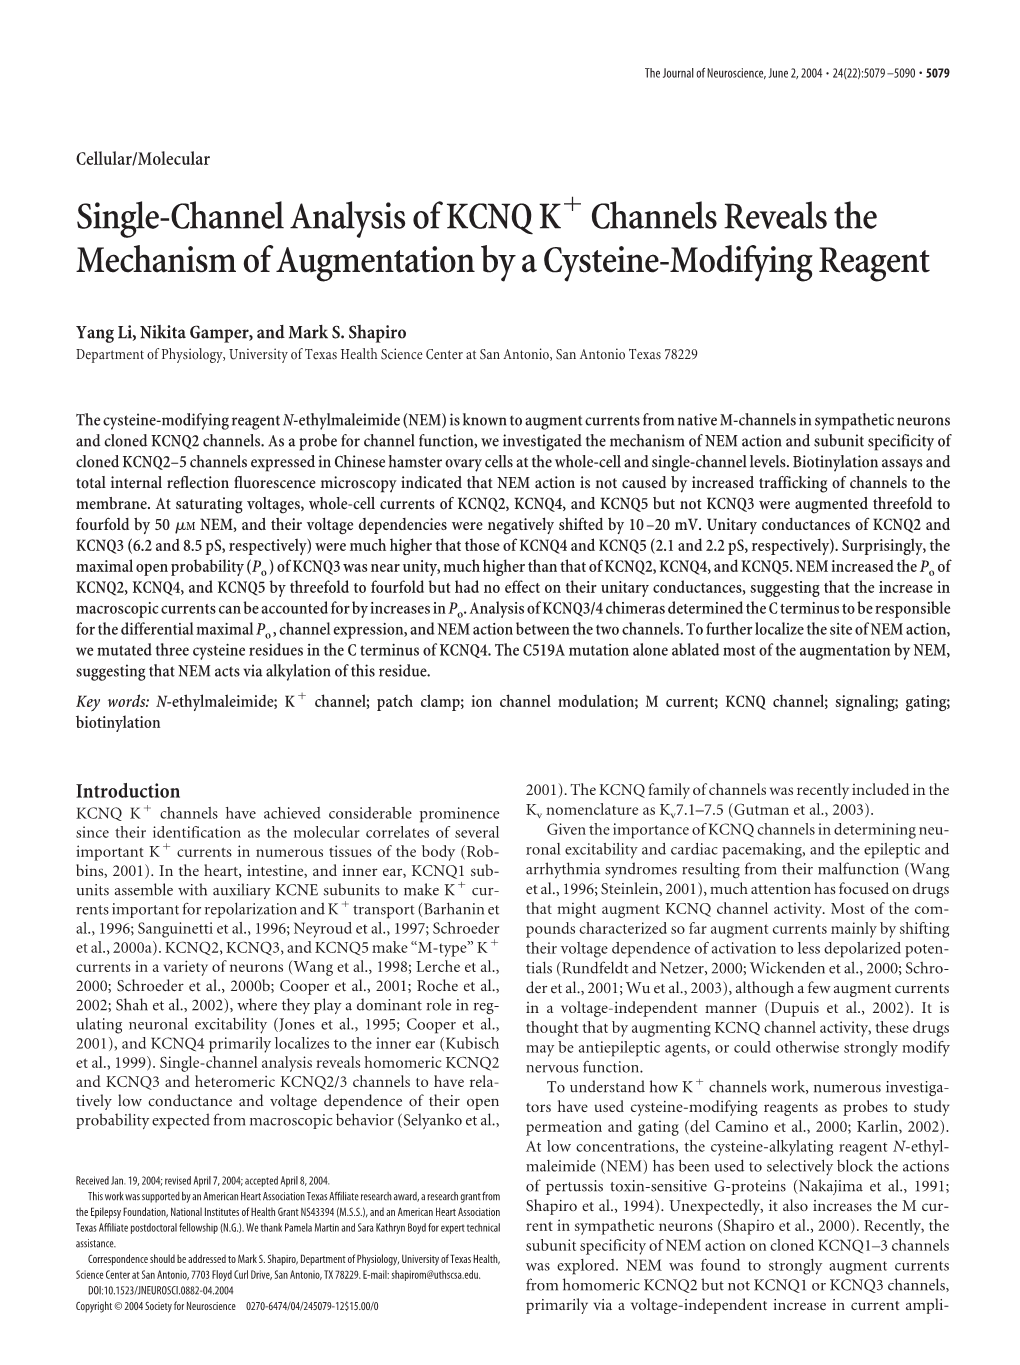 Single-Channel Analysis of KCNQ K Channels Reveals the Mechanism of Augmentation by a Cysteine-Modifying Reagent